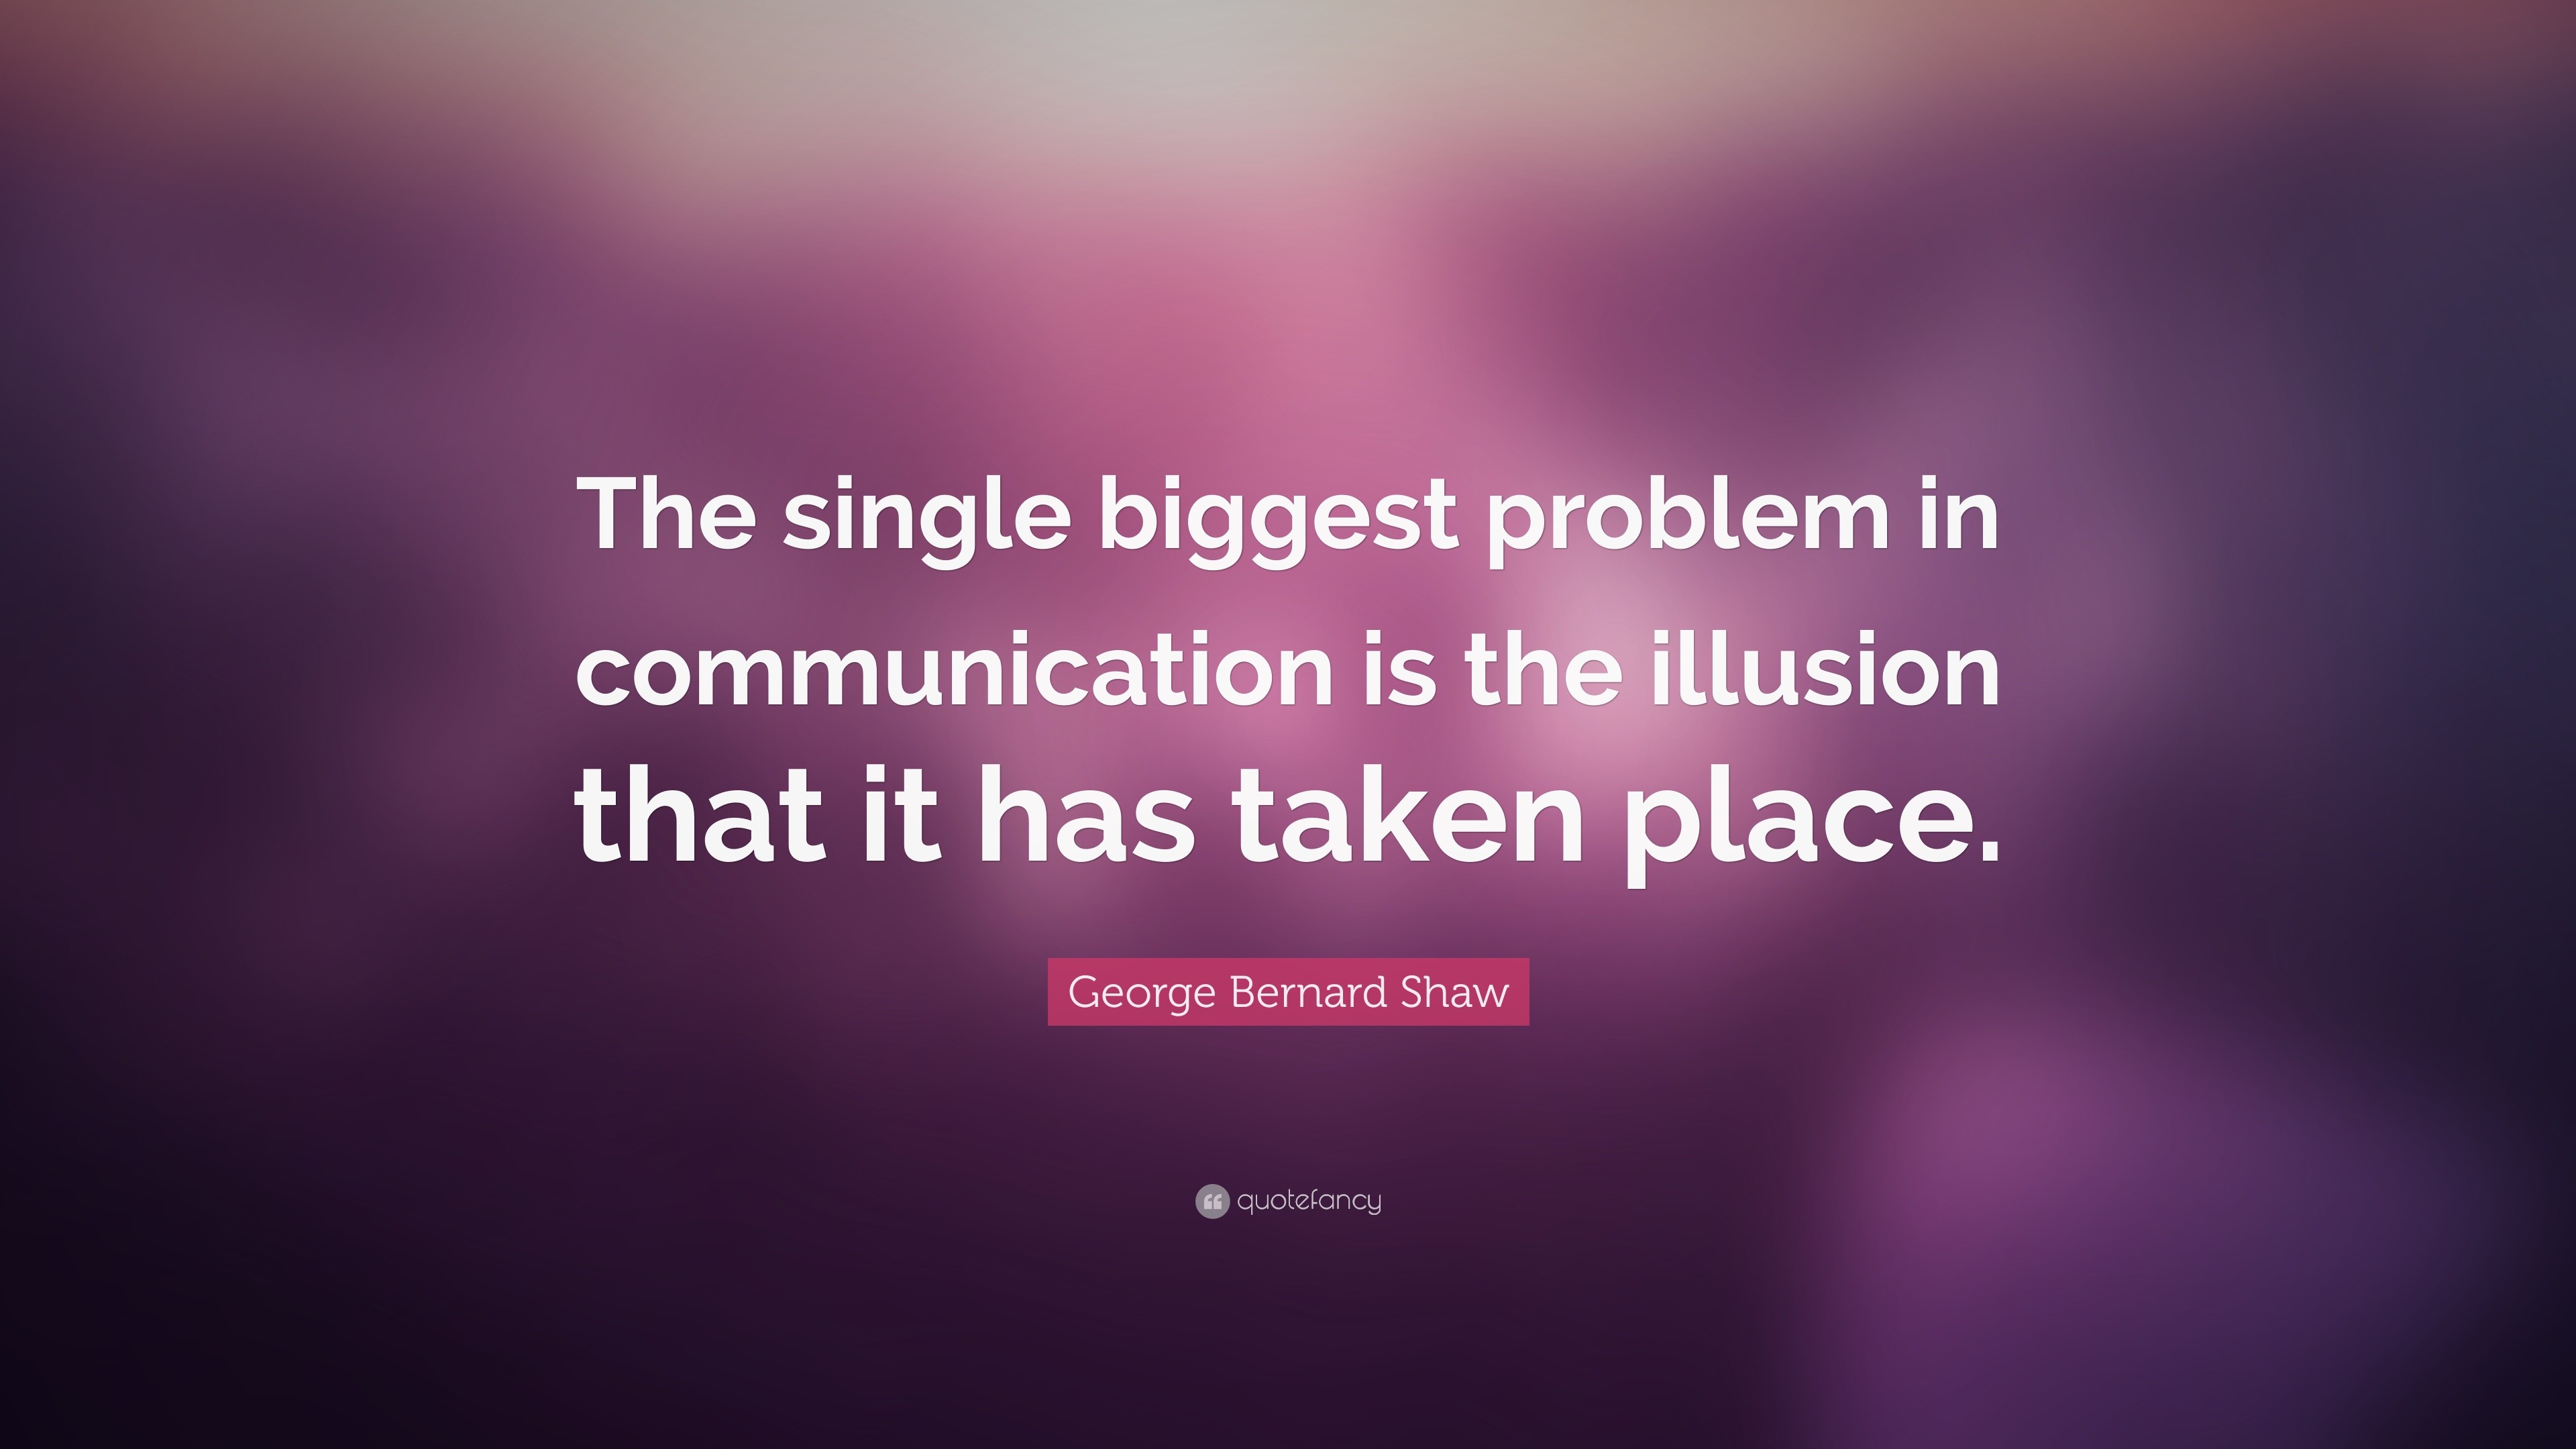 George Bernard Shaw Quote: “The single biggest problem in communication